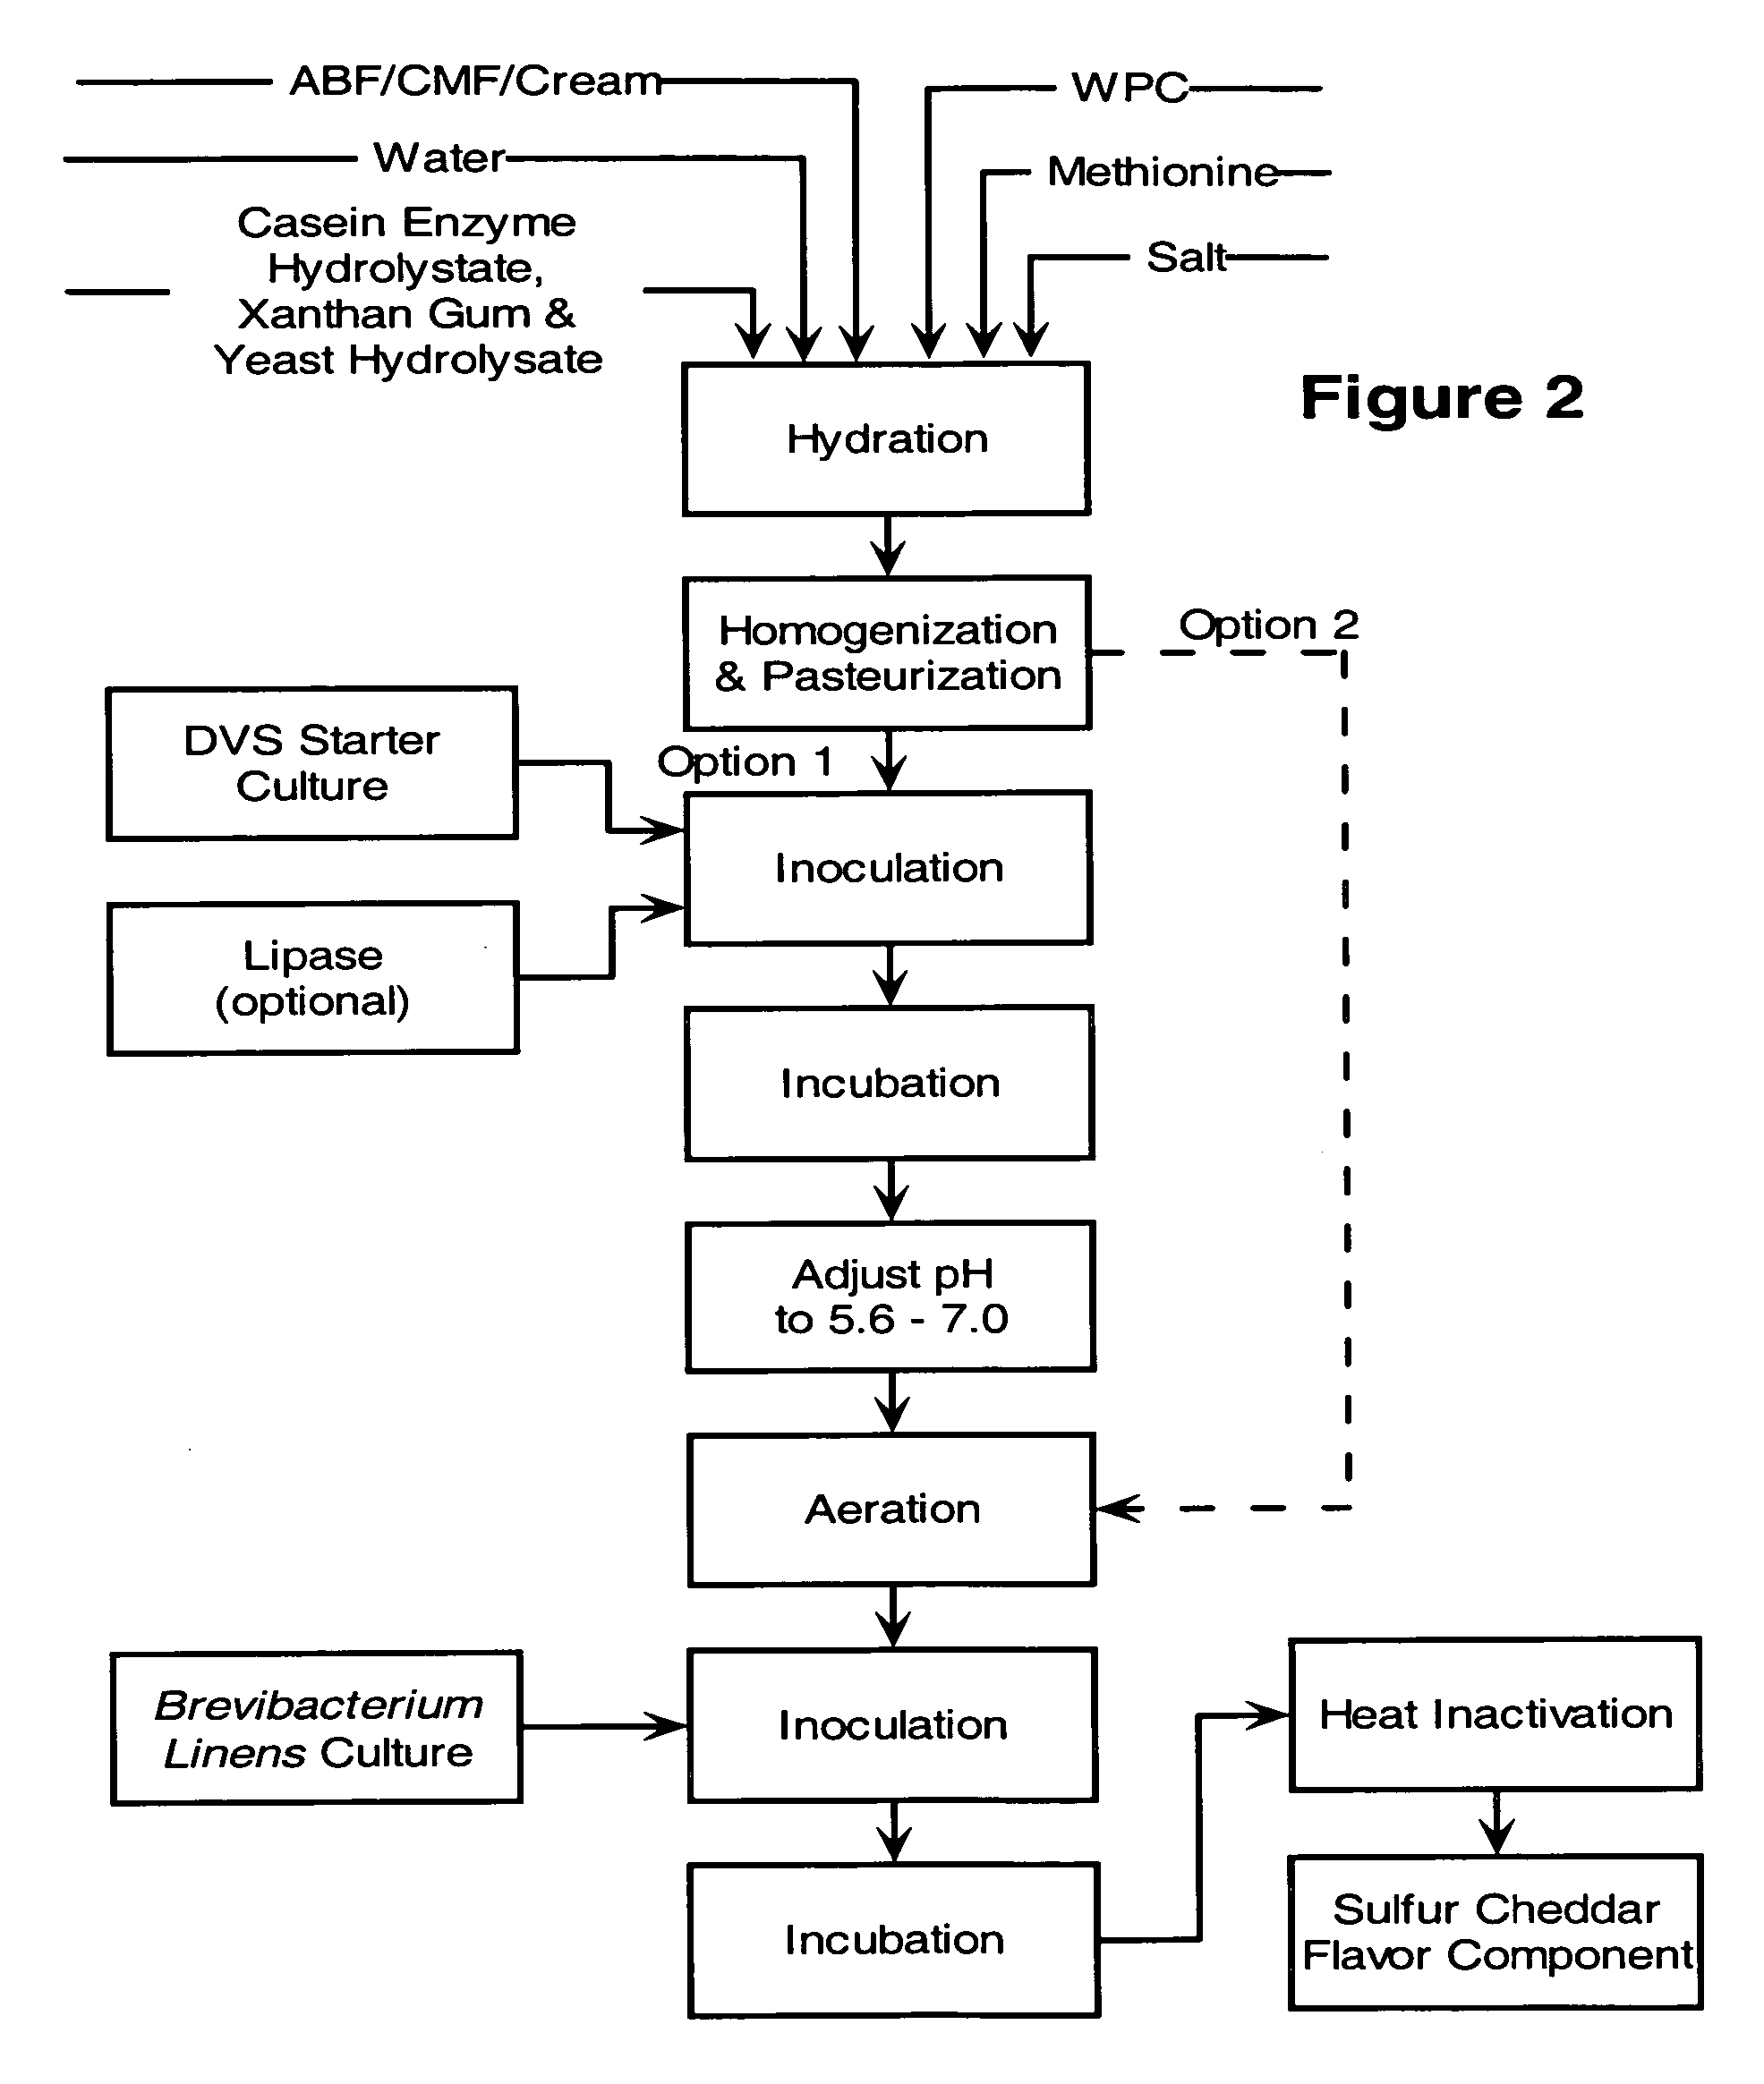 Heat-stable flavoring components and cheese flavoring systems incorporating them